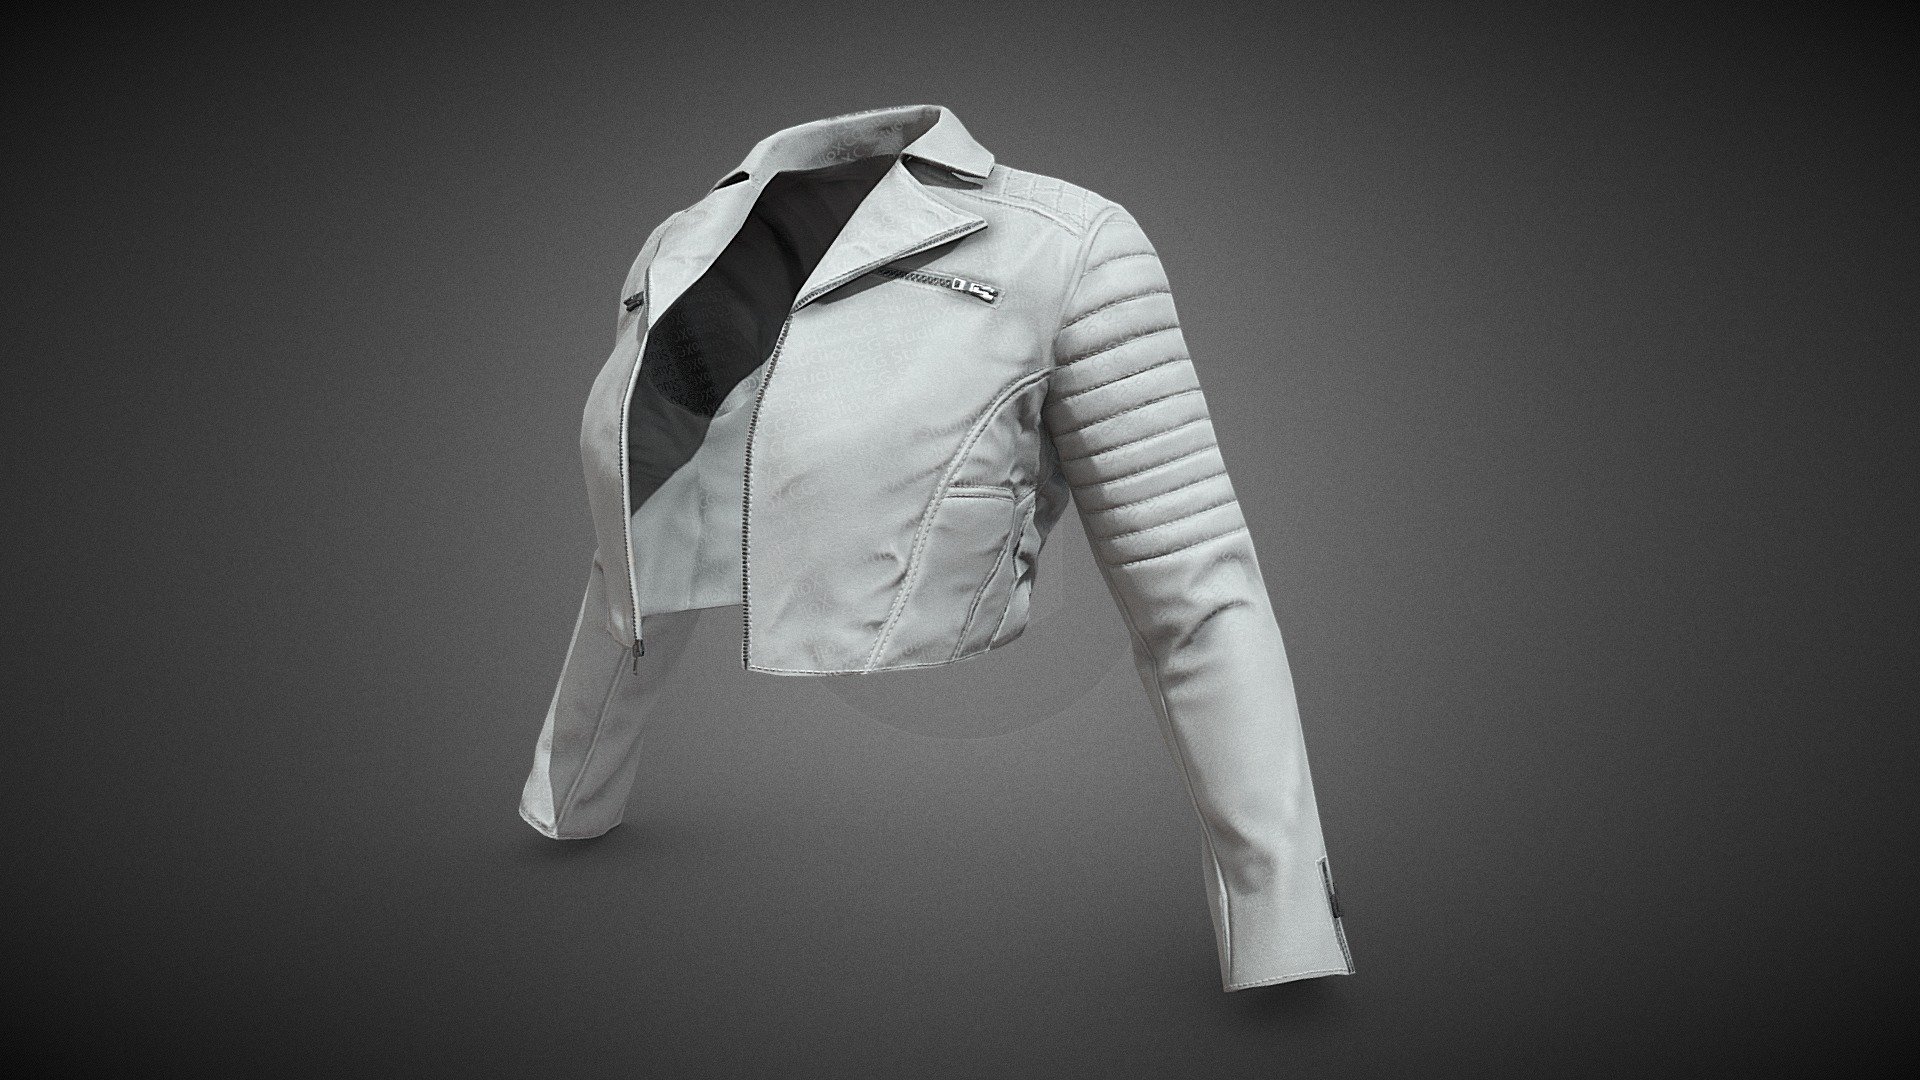 CG StudioX Present :
White Biker Jacket Lowpoly/PBR




This is White Biker Jacket Comes with Specular and Metalness PBR.

The photo been rendered using Marmoset Toolbag 4 (real time game engine )


Features :



Comes with Specular and Metalness PBR 4K texture .

Good topology.

Low polygon geometry.

The Model is prefect for game for both Specular workflow as in Unity and Metalness as in Unreal engine .

The model also rendered using Marmoset Toolbag 4 with both Specular and Metalness PBR and also included in the product with the full texture.

The texture can be easily adjustable .


Texture :



One set of UV [Albedo -Normal-Metalness -Roughness-Gloss-Specular-Ao] (4096*4096)


Files :
Marmoset Toolbag 4 ,Maya,,FBX,glTF,Blender,OBj with all the textures.




Contact me for if you have any questions.
 - White Biker Jacket - Buy Royalty Free 3D model by CG StudioX (@CG_StudioX) 3d model